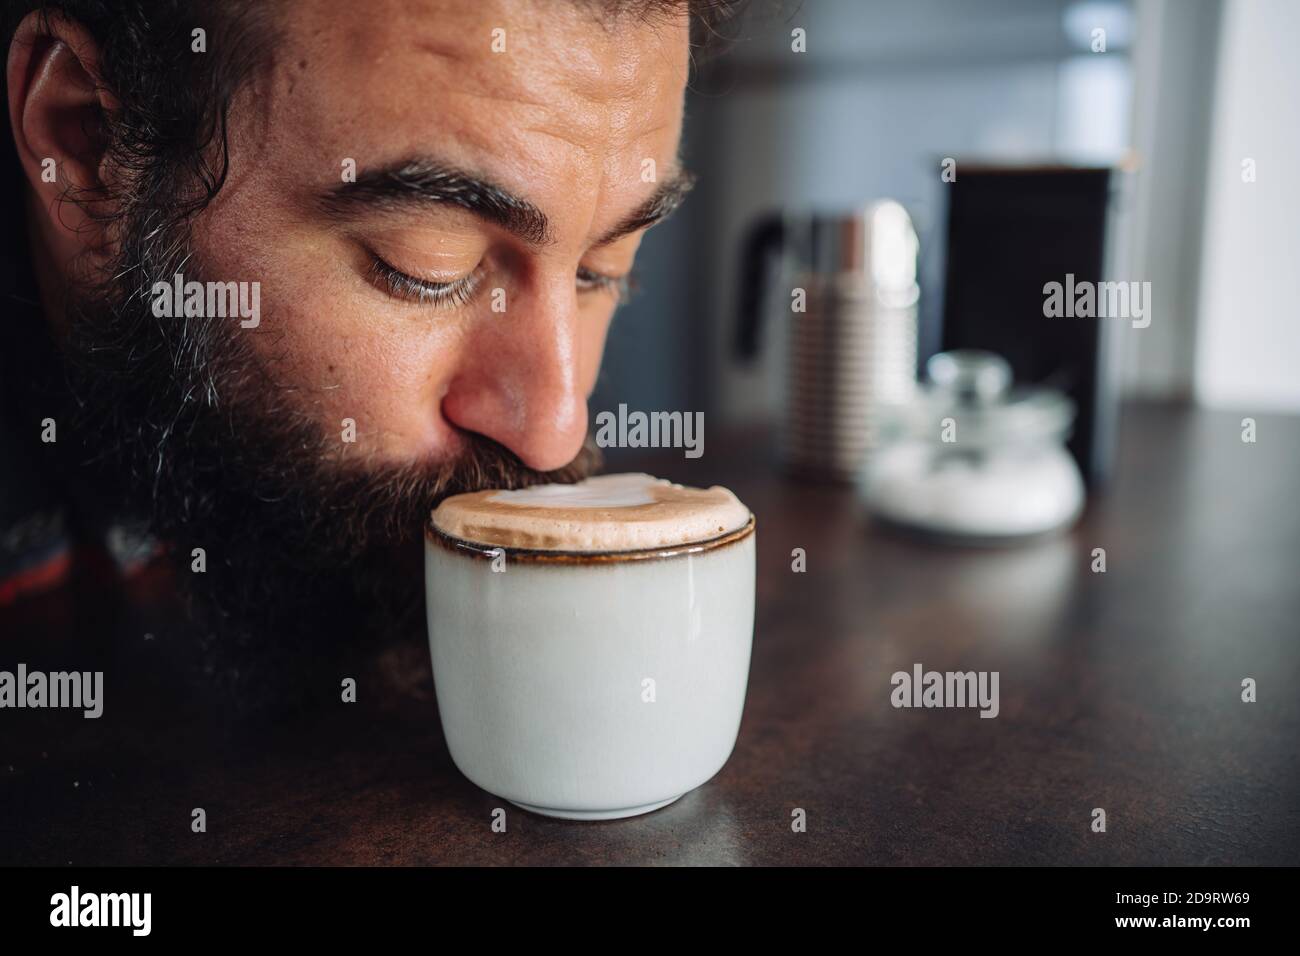 https://c8.alamy.com/comp/2D9RW69/detail-of-a-bearded-man-drinking-from-a-coffee-cup-with-some-milk-foam-2D9RW69.jpg